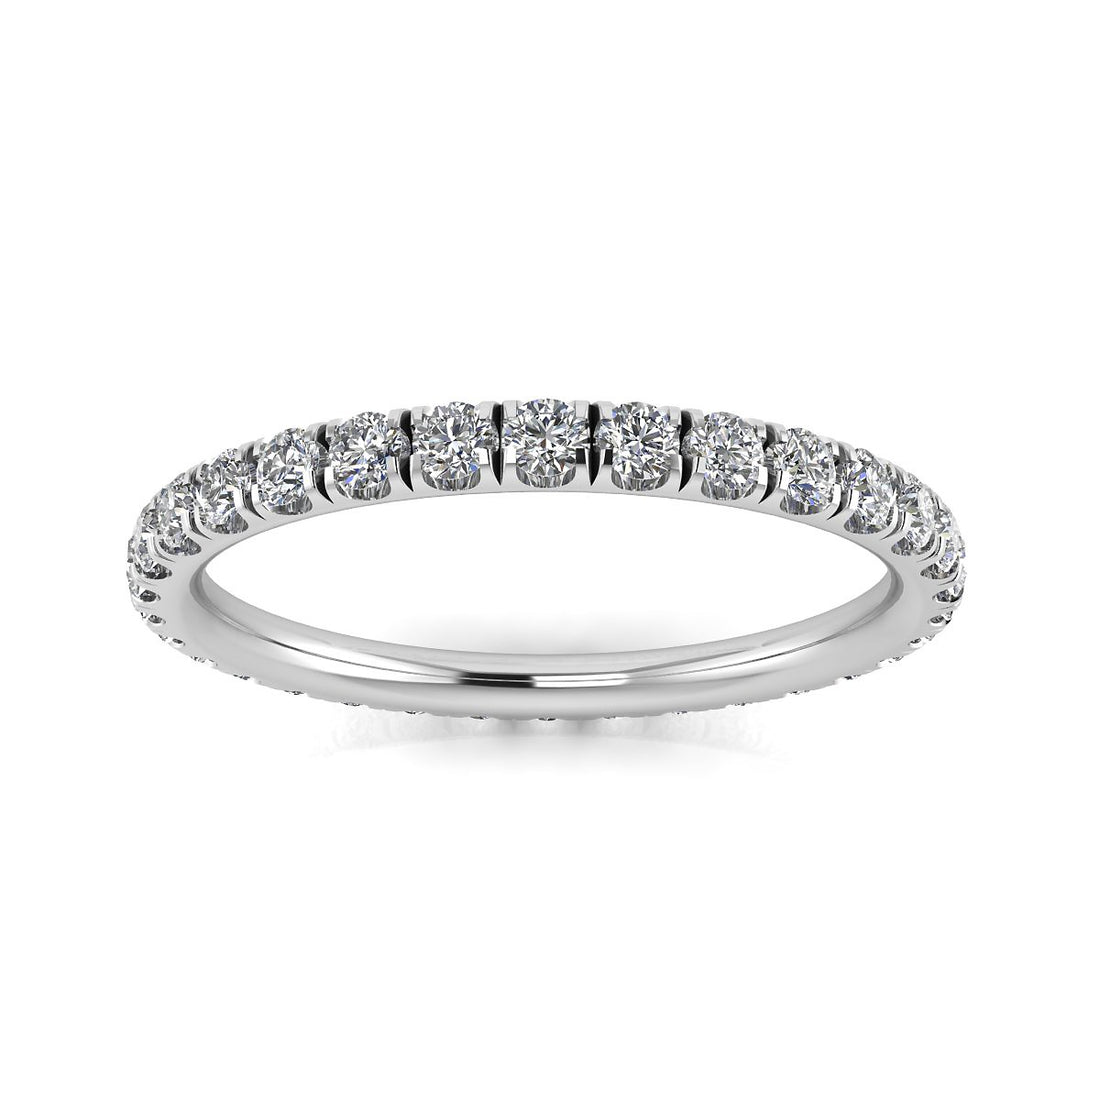 Are Diamond Eternity Rings a Good Investment?